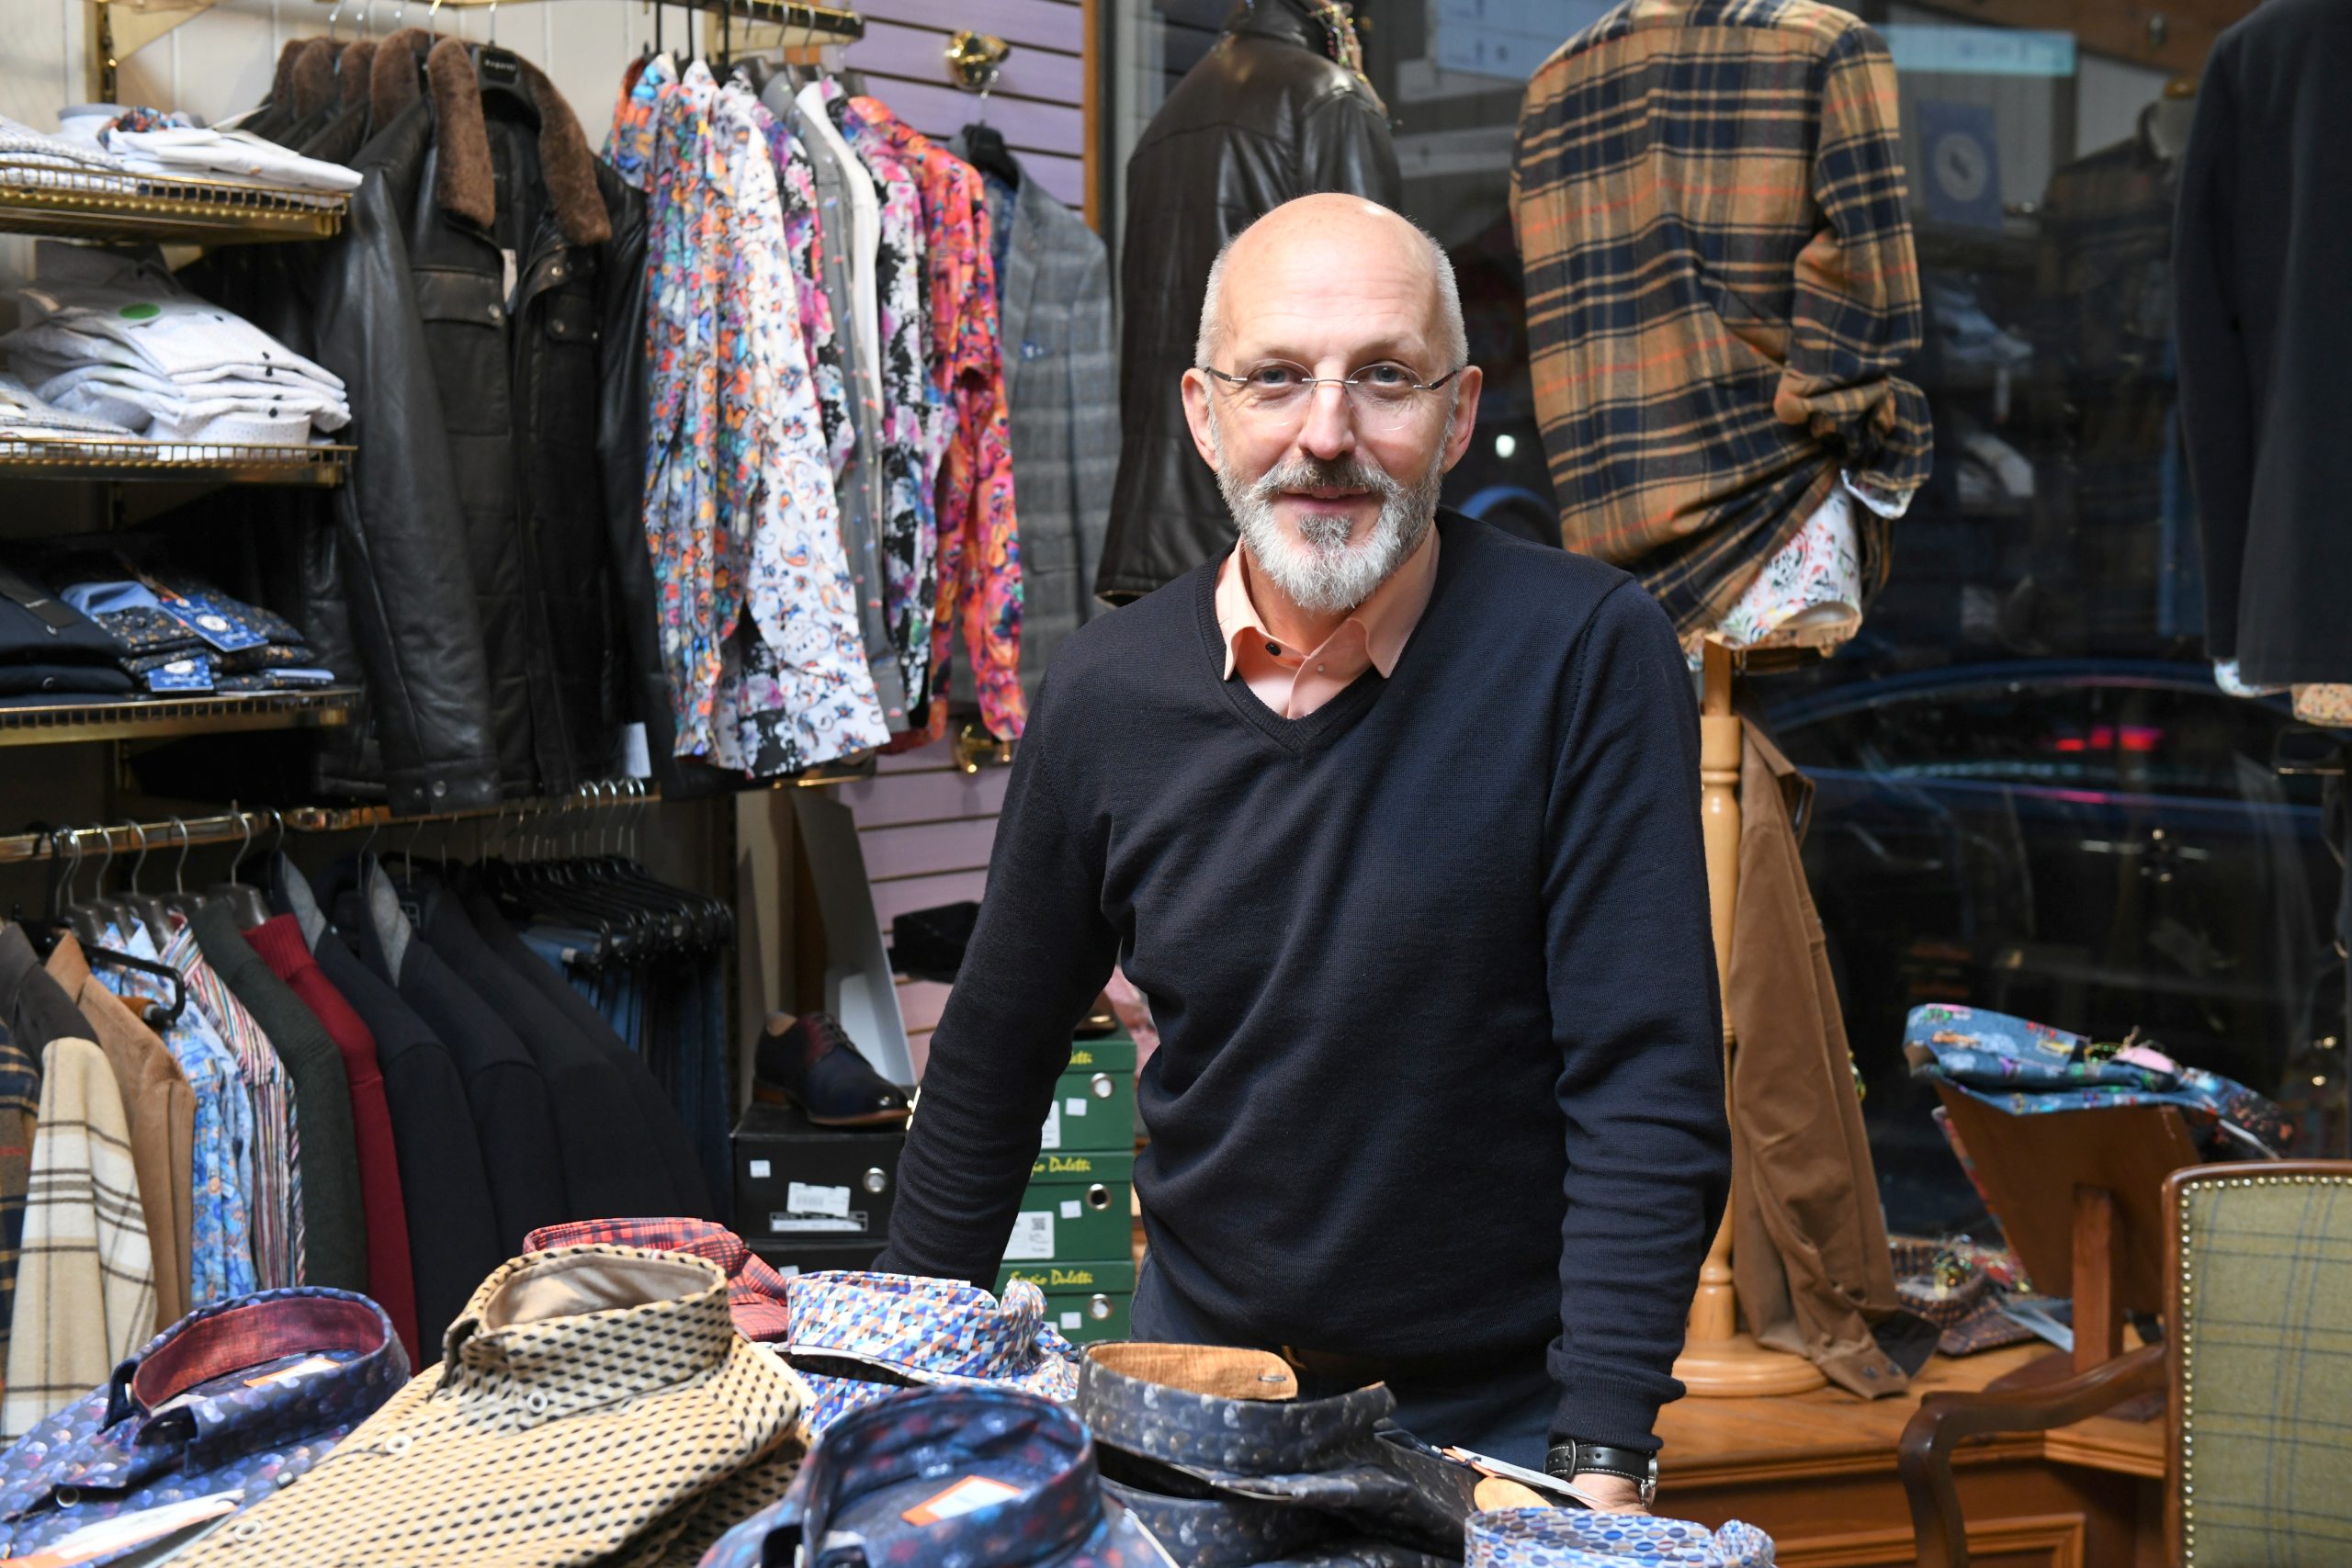 Christmas Stars featuring Donald Maclean of Primo Menswear on Queensgate